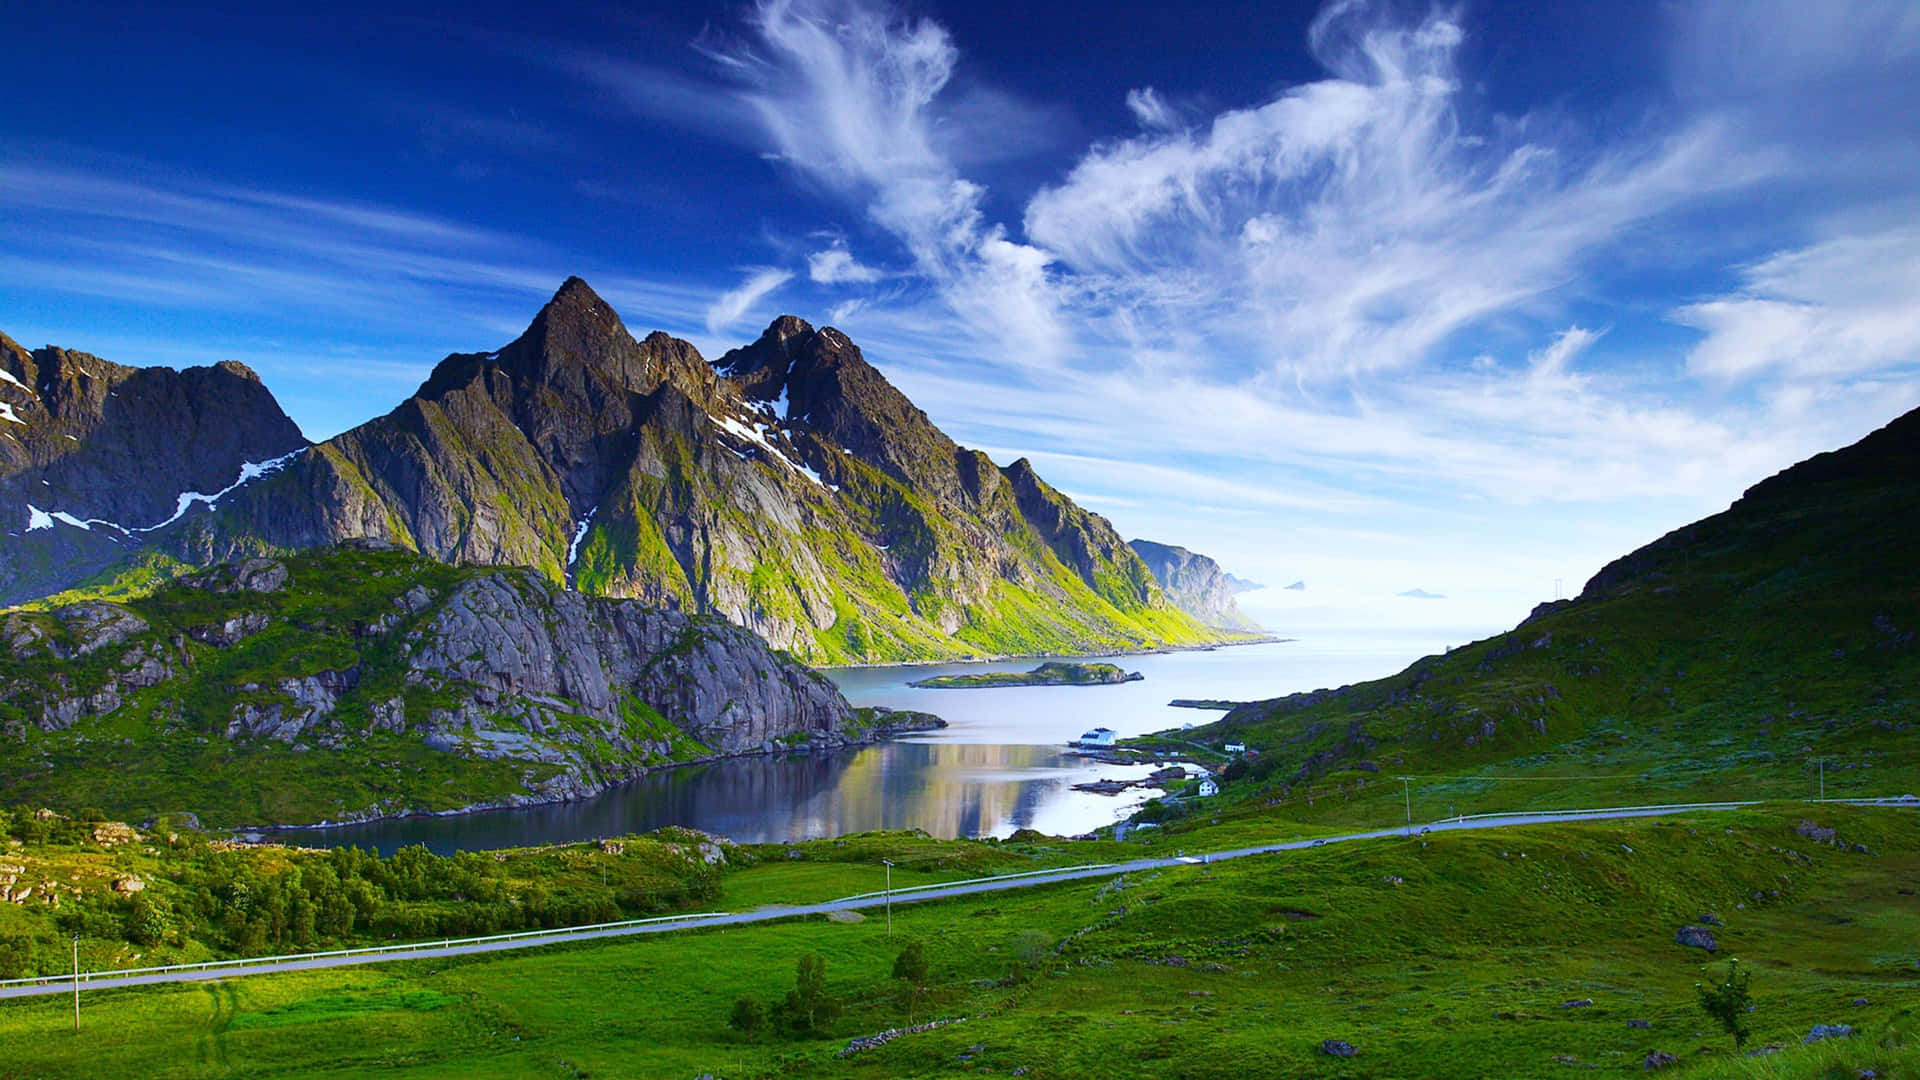 “A mesmerizing landscape of rugged mountains and lush greenery.” Wallpaper